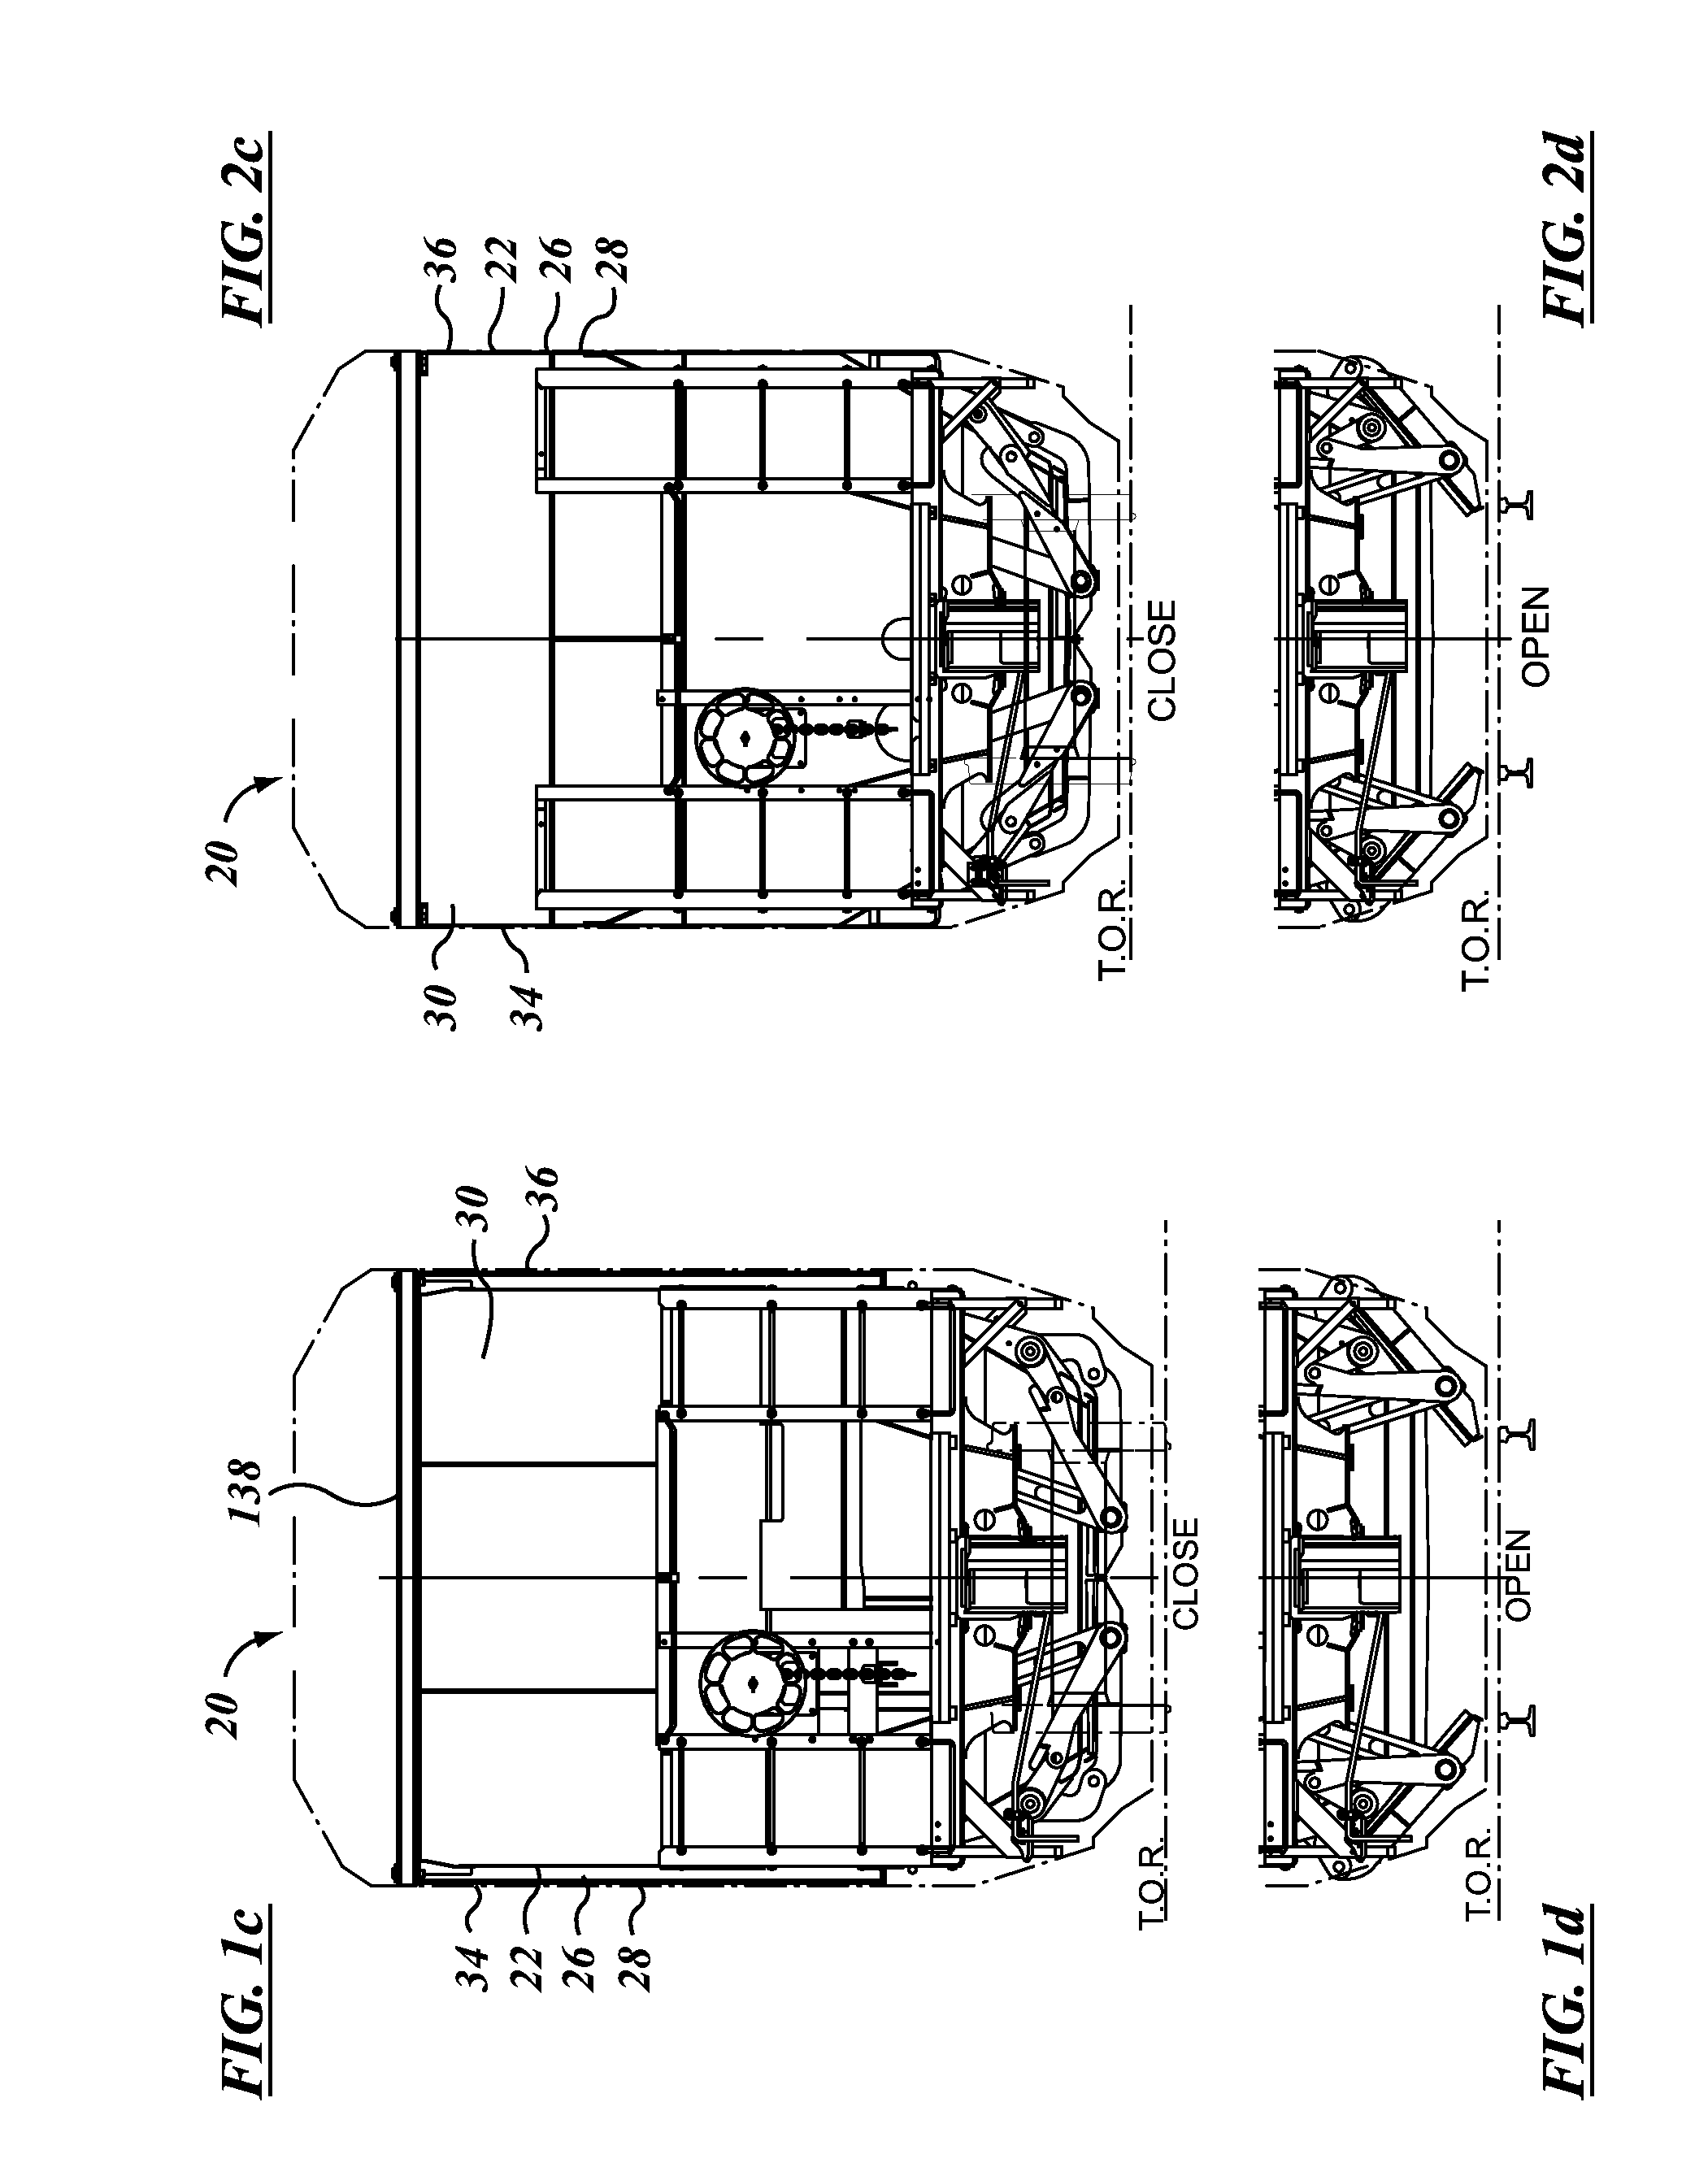 Railroad car and door mechanism therefor